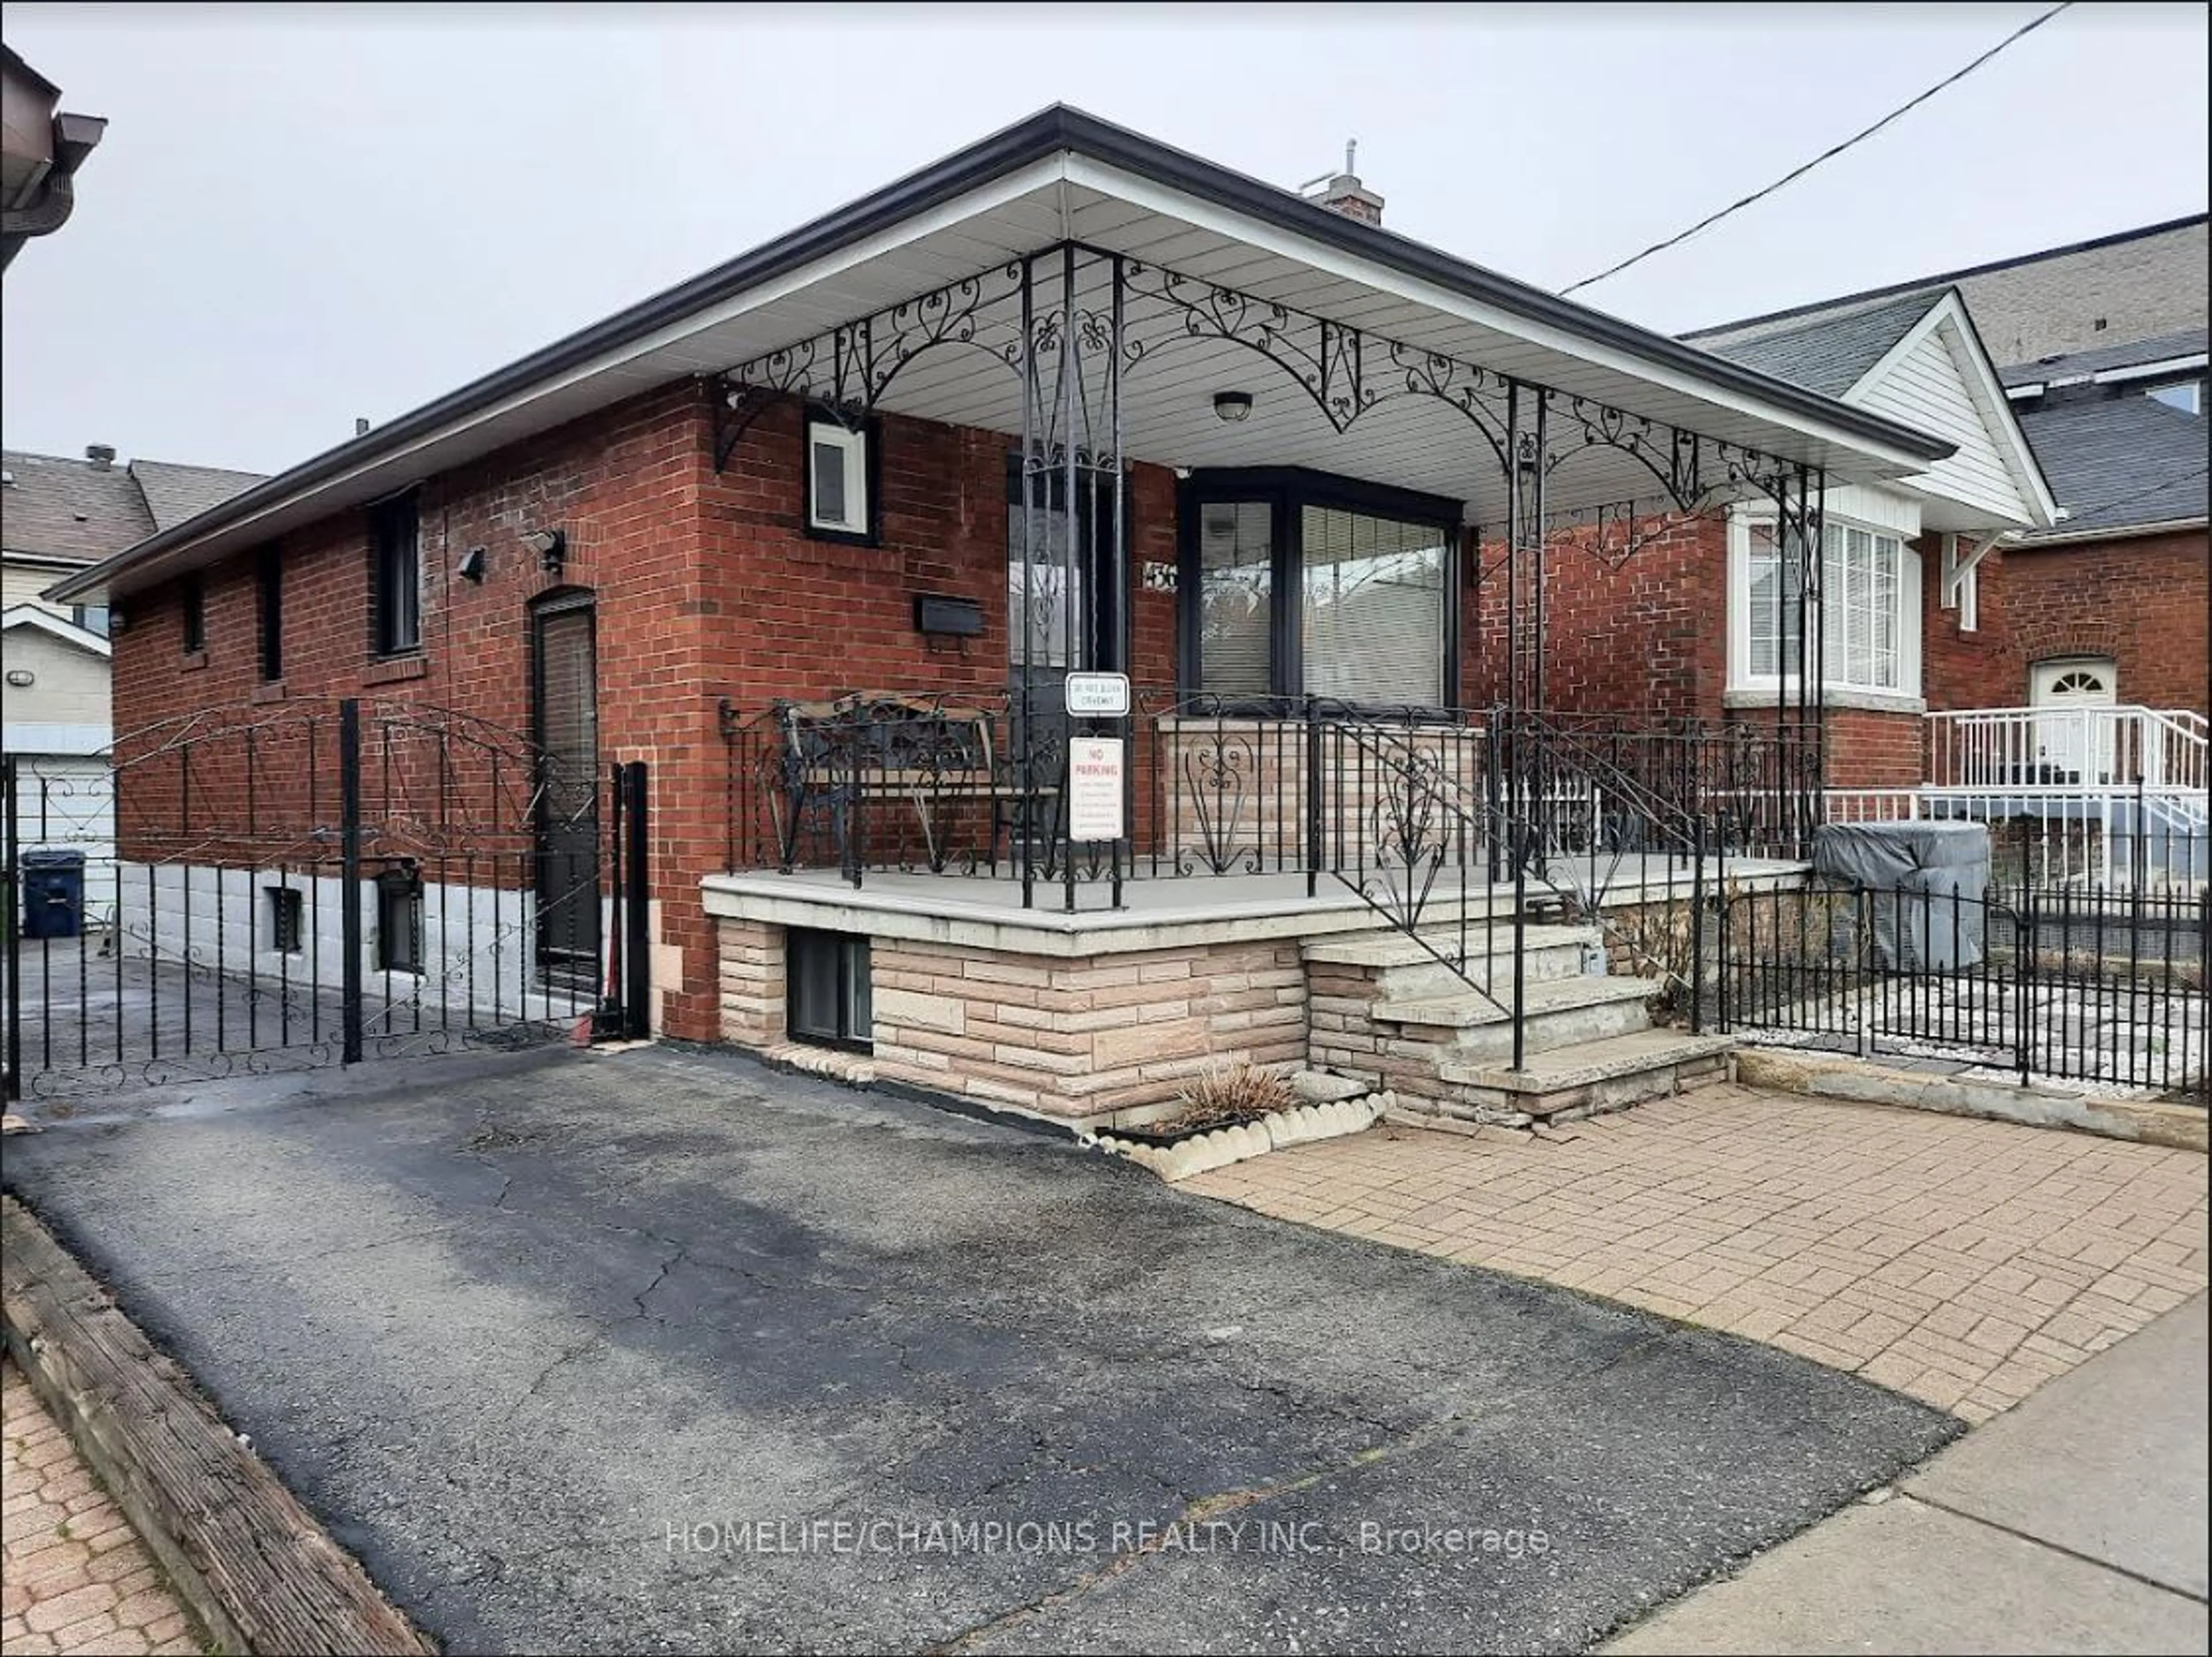 Home with brick exterior material for 436 Oakwood Ave, Toronto Ontario M6E 2W5